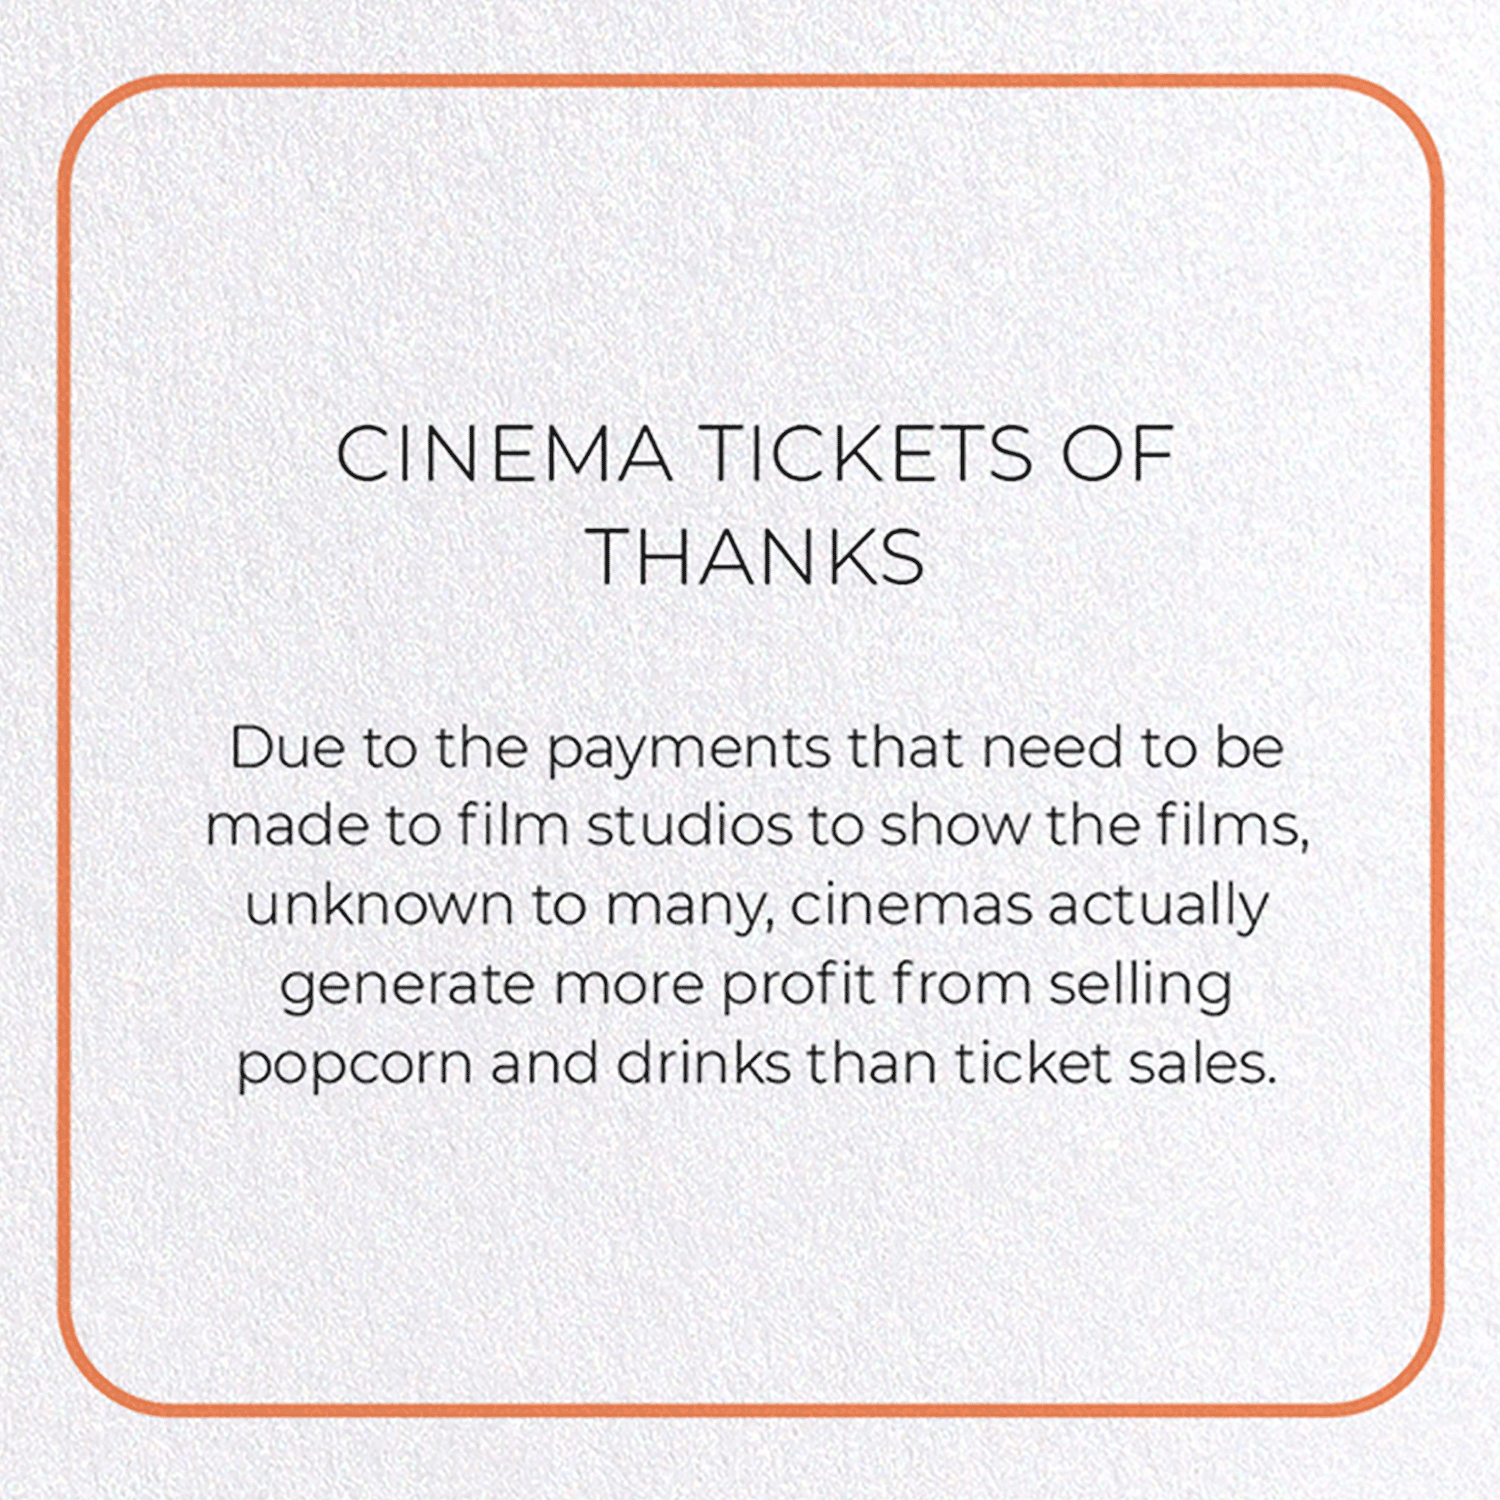 CINEMA TICKETS OF THANKS: Photo Greeting Card